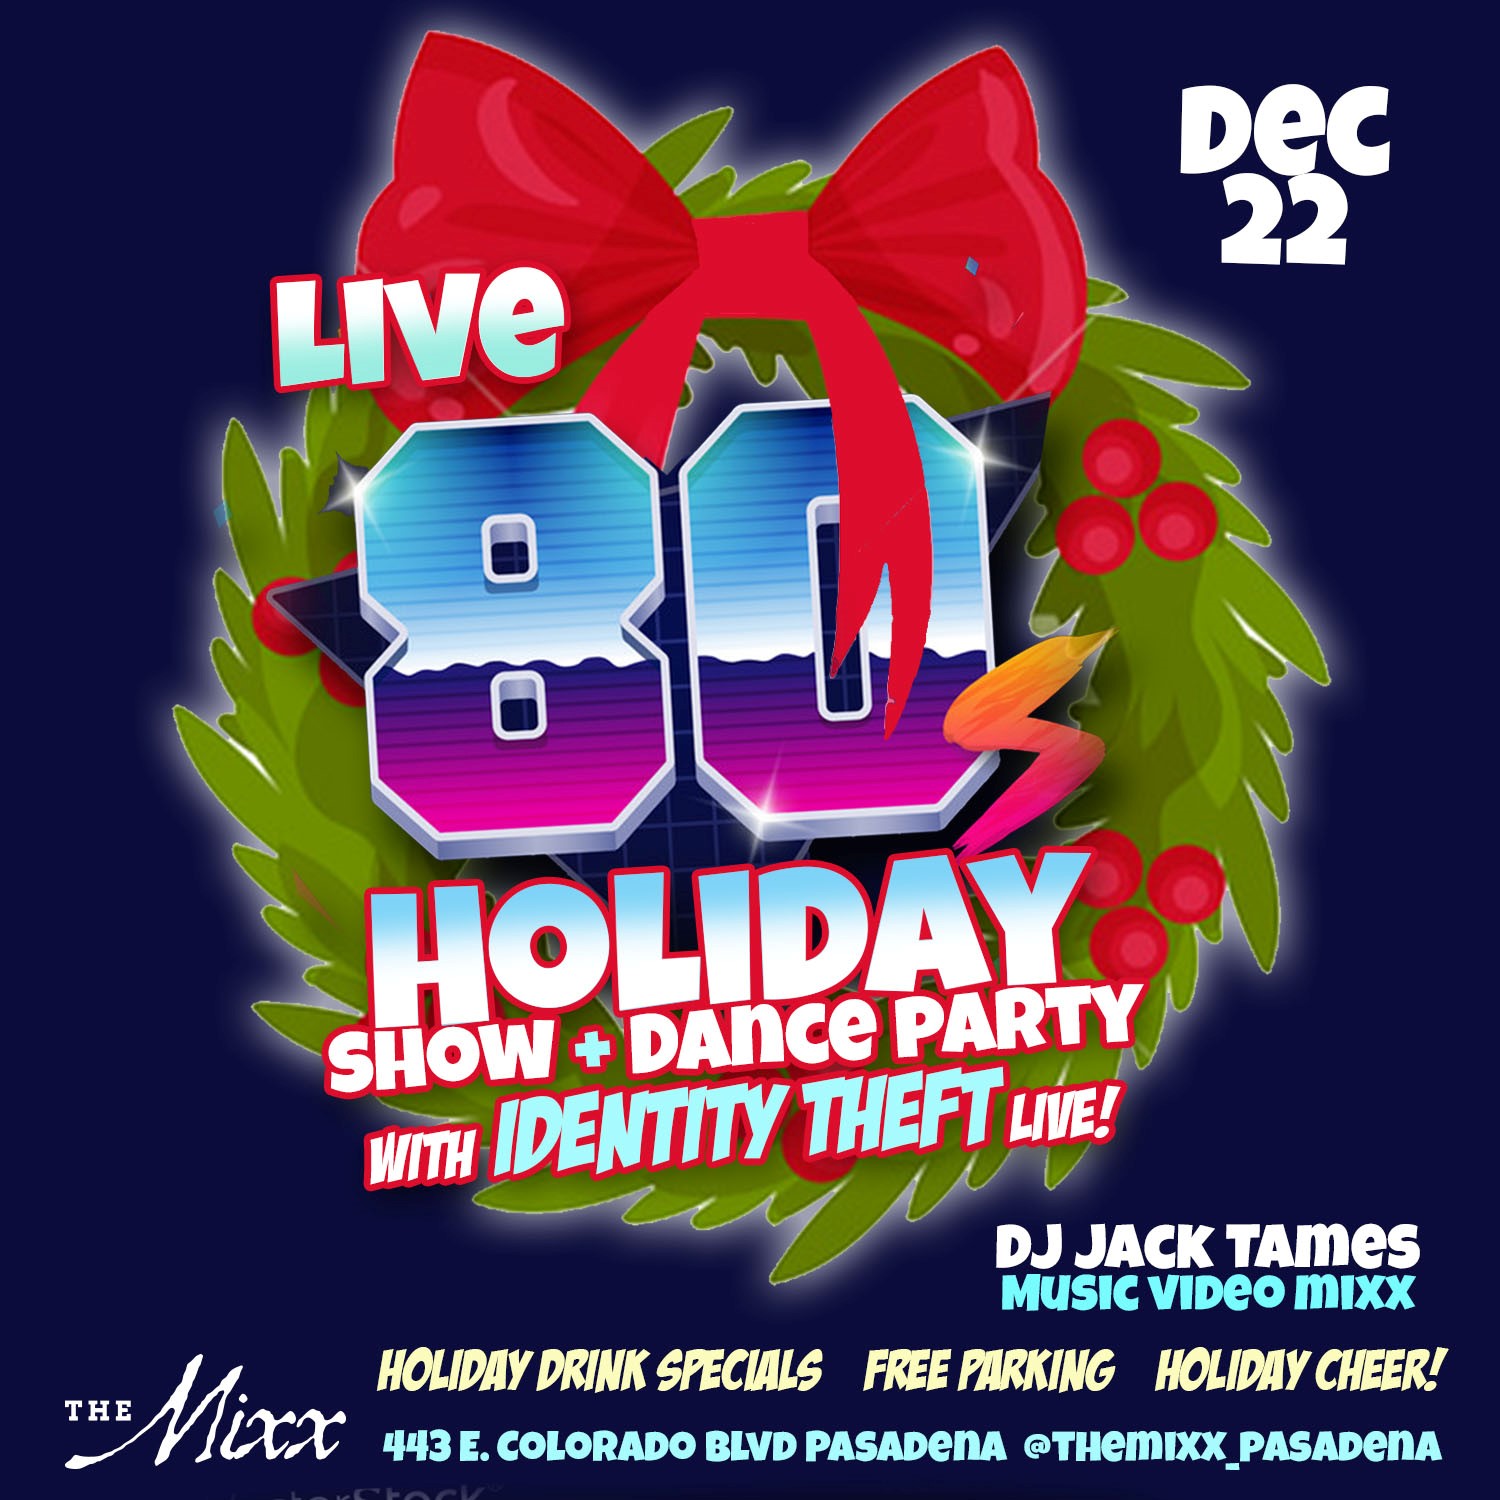 You are currently viewing LIVE 80’s Holiday Live Show & Dance Party wit Identity Theft